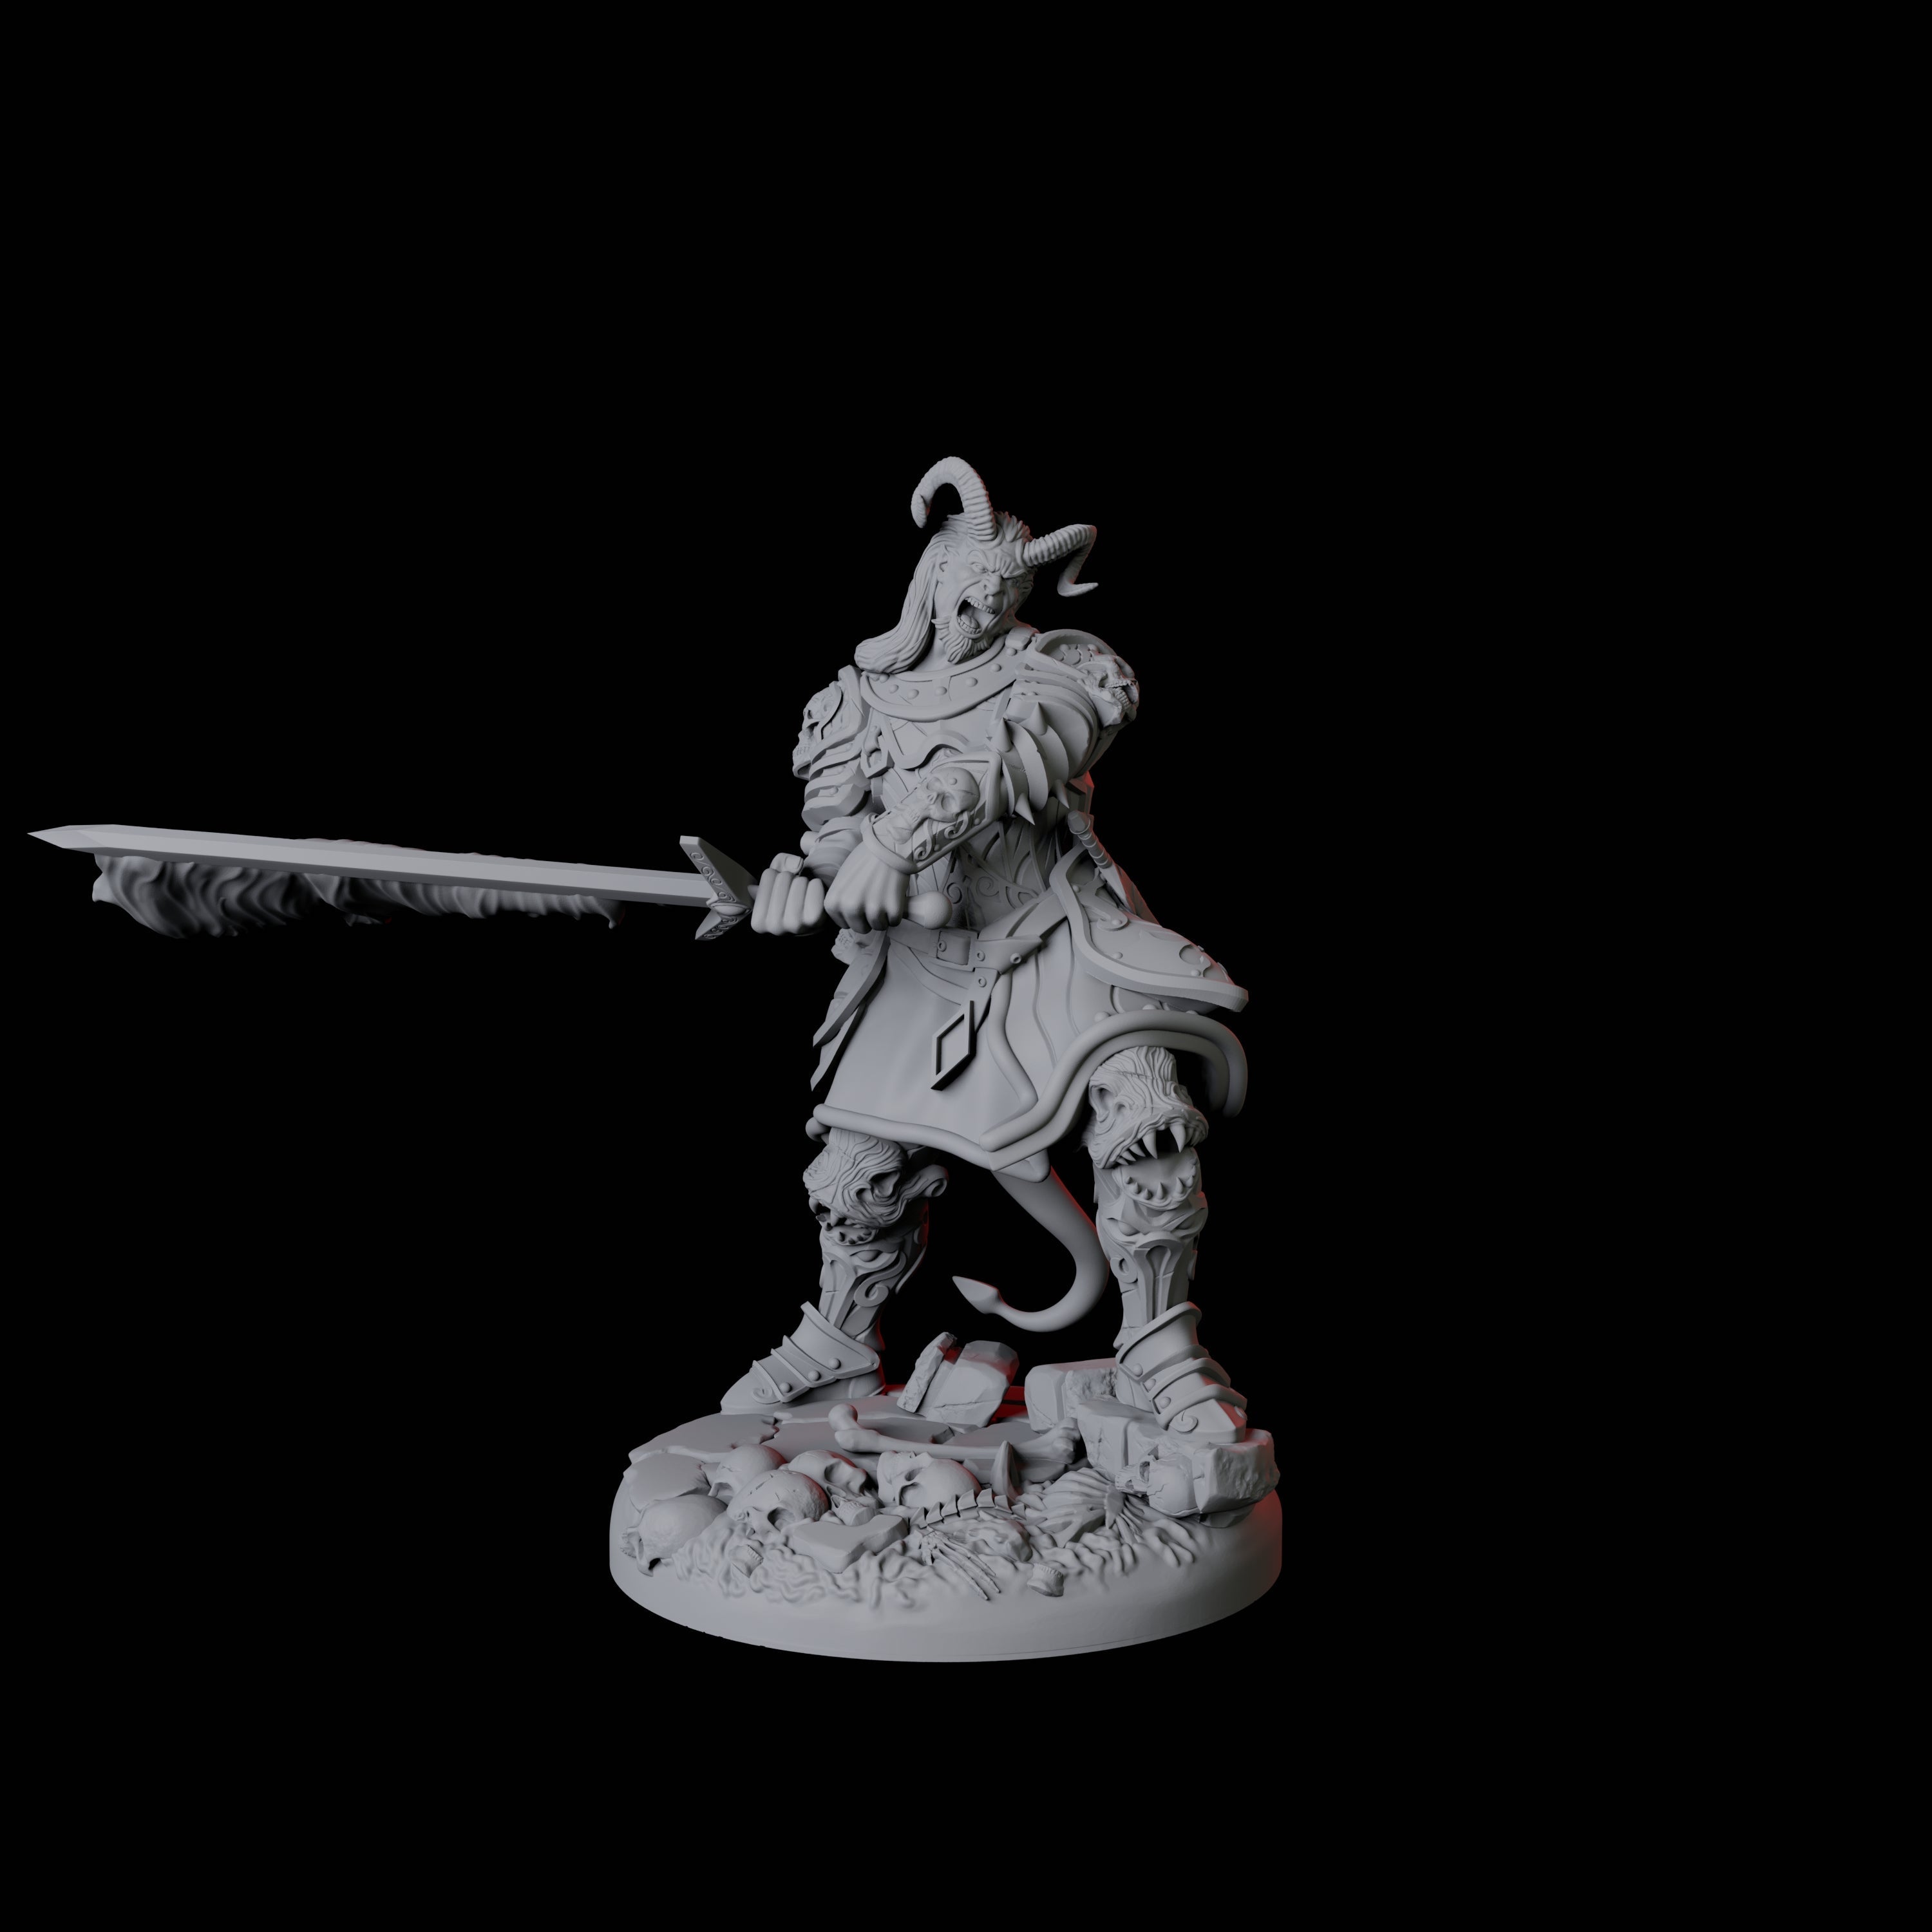 Threatening Bearded Devil B Miniature for Dungeons and Dragons, Pathfinder or other TTRPGs